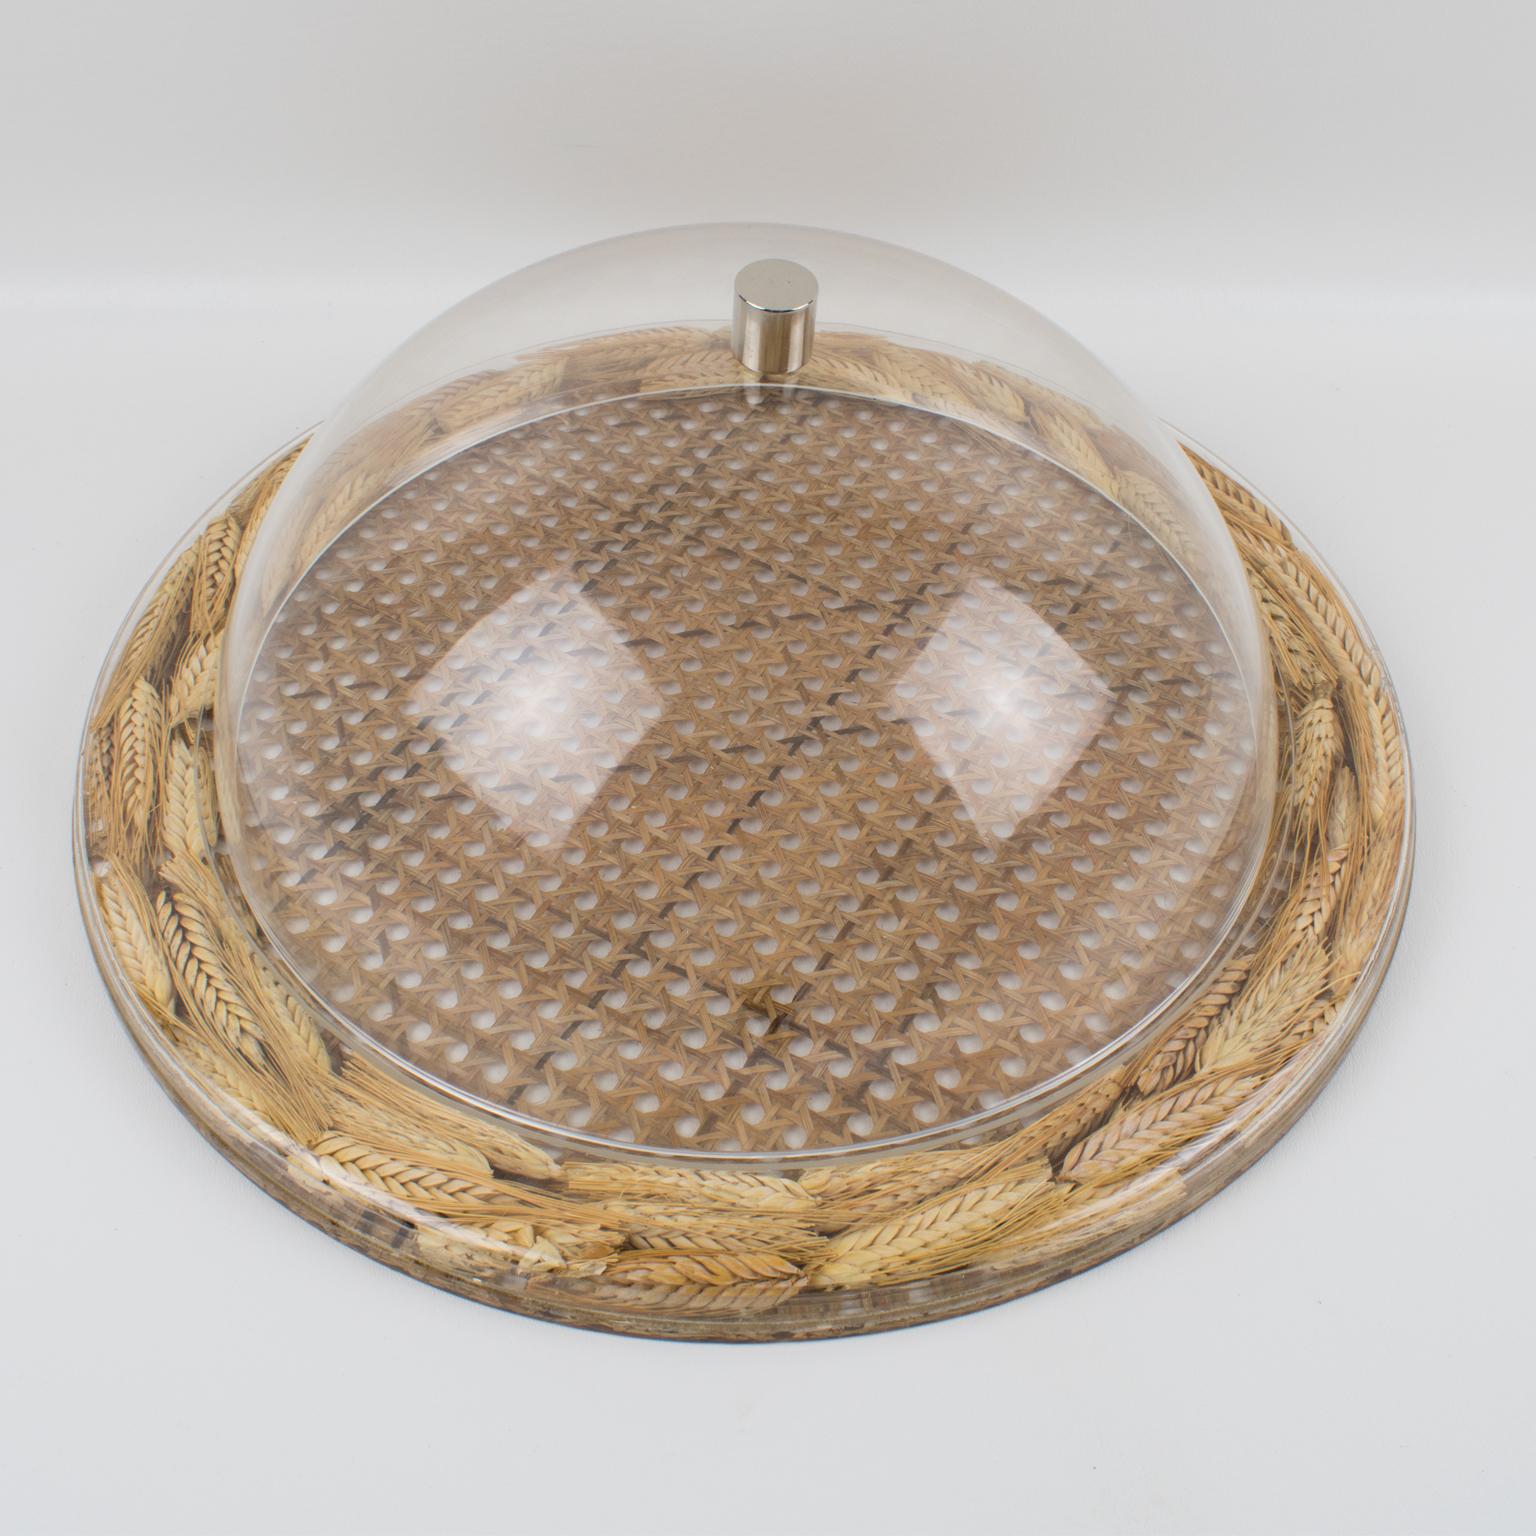 Modern Christian Dior Tray Board Platter Lucite, Rattan and Wheat